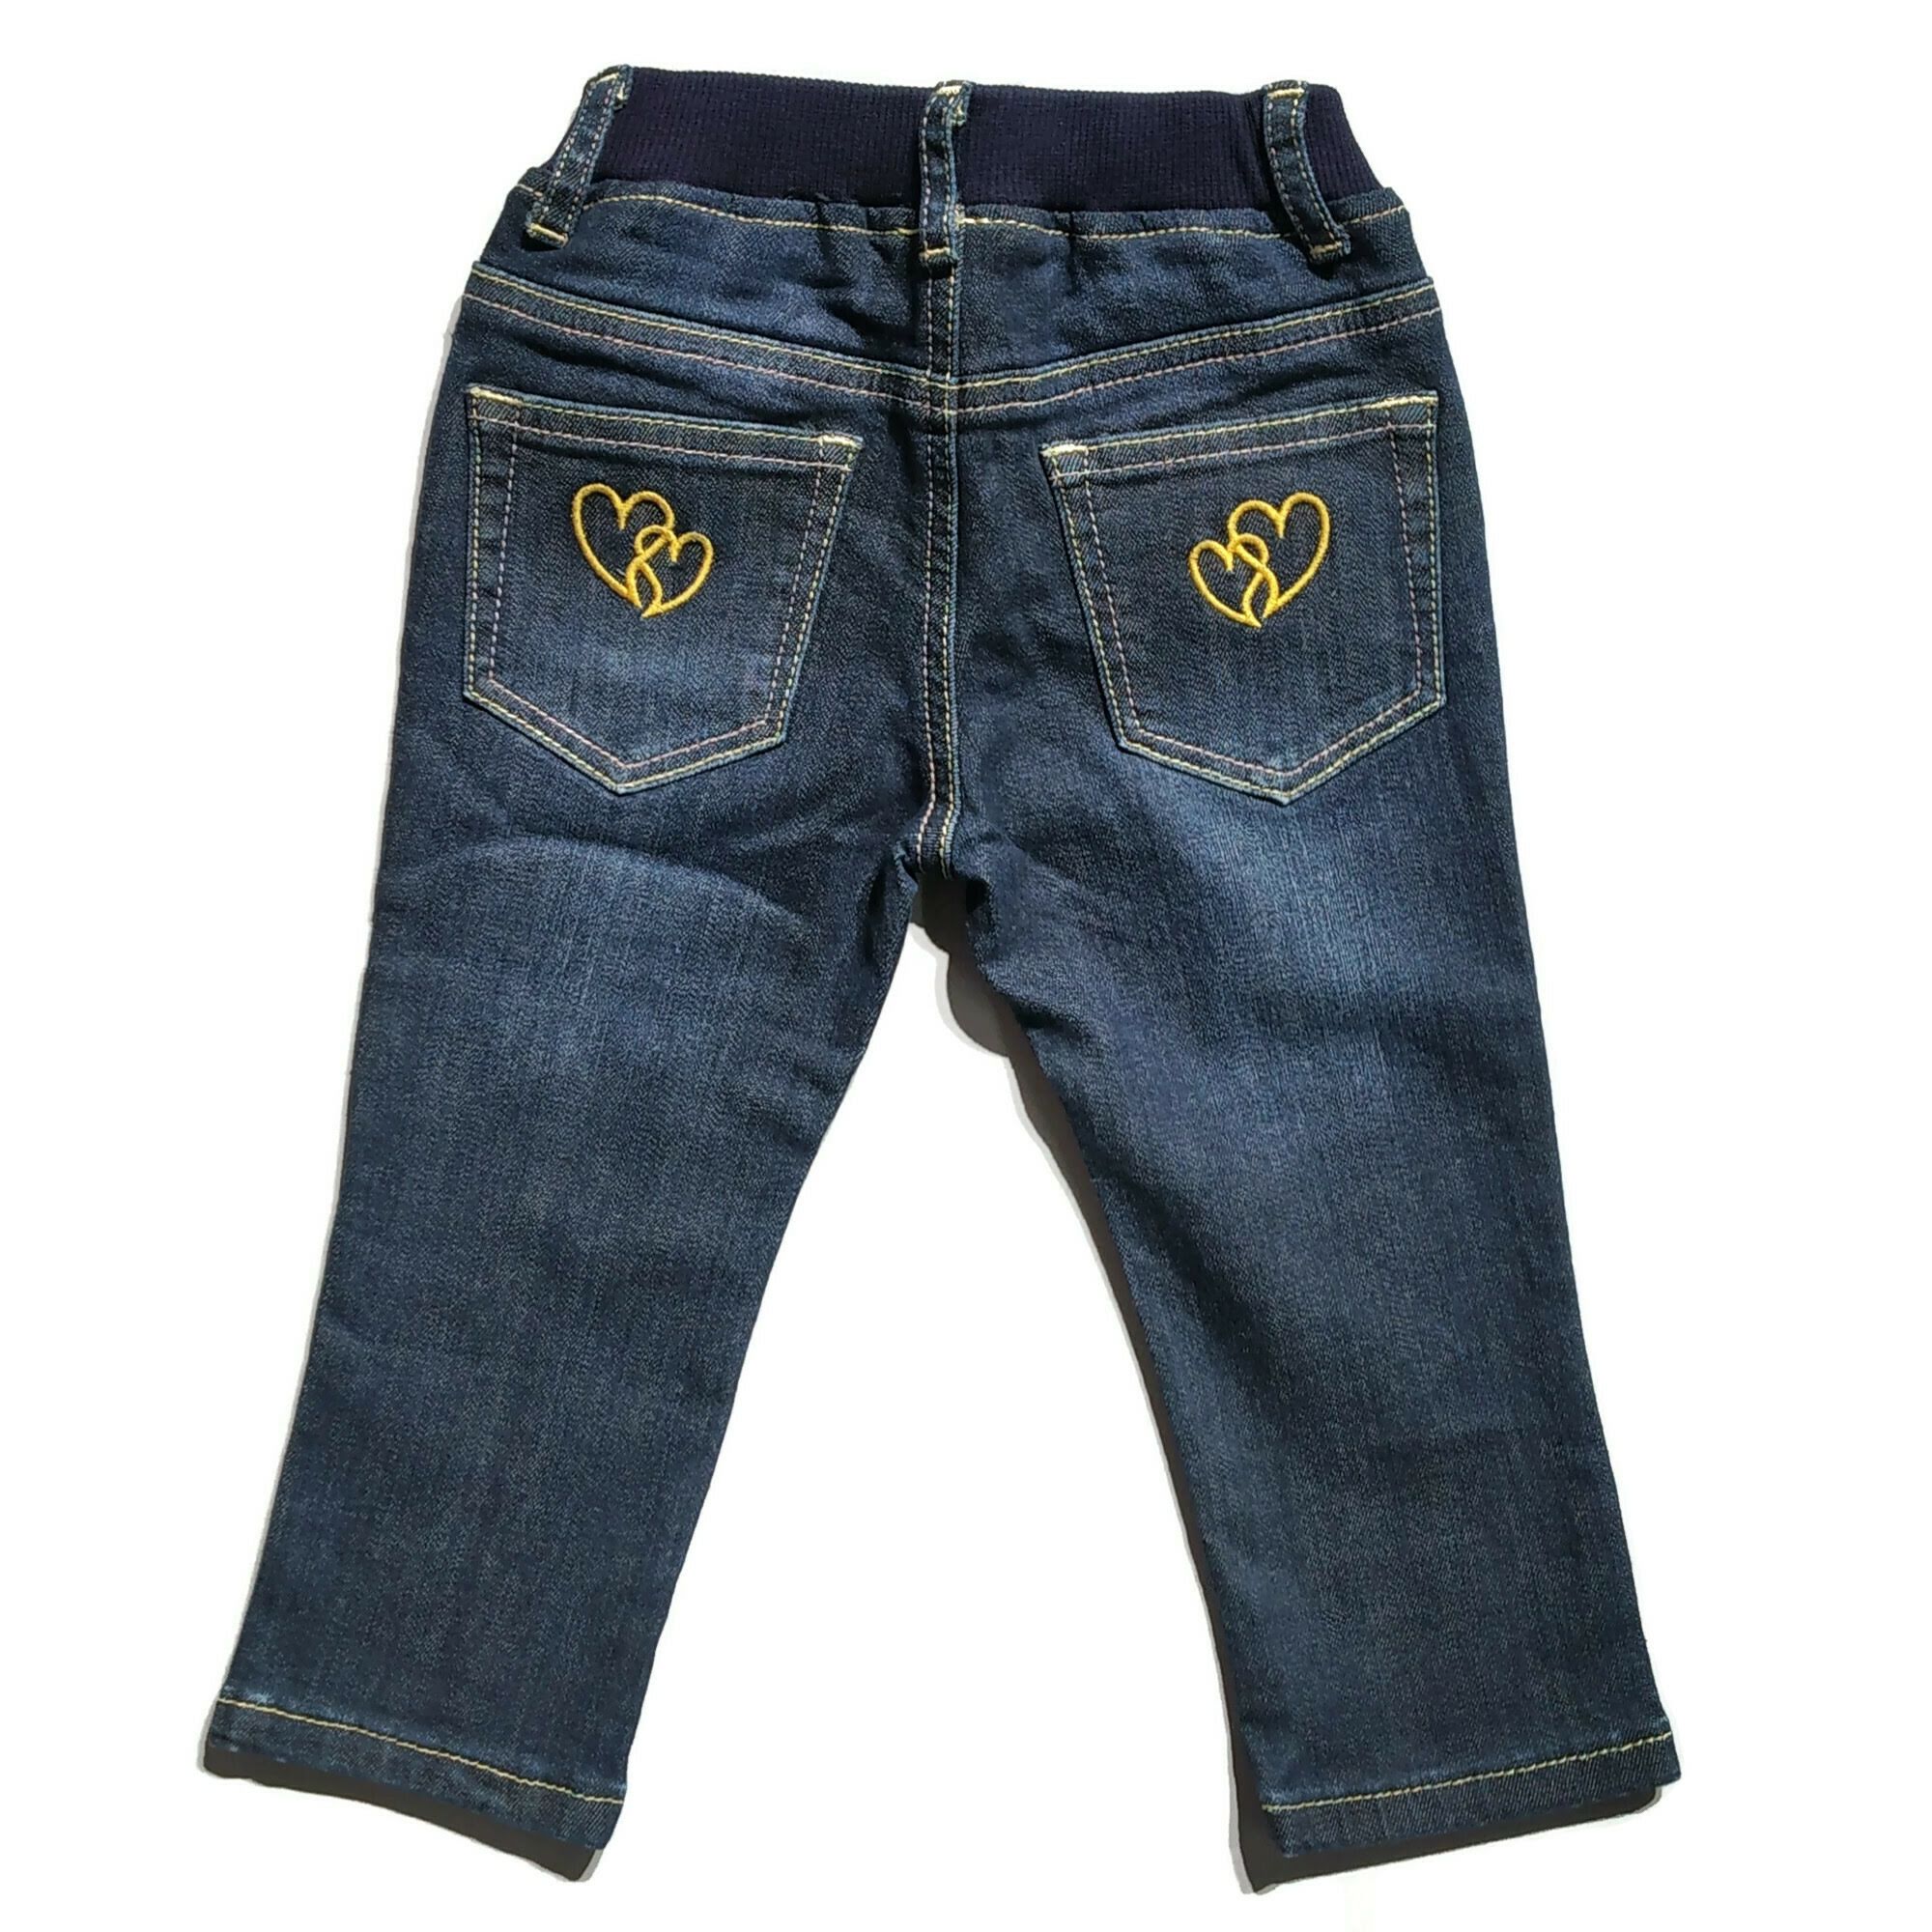 Relaxed Fit Ankle Jeans - Light denim blue - Kids | H&M IN